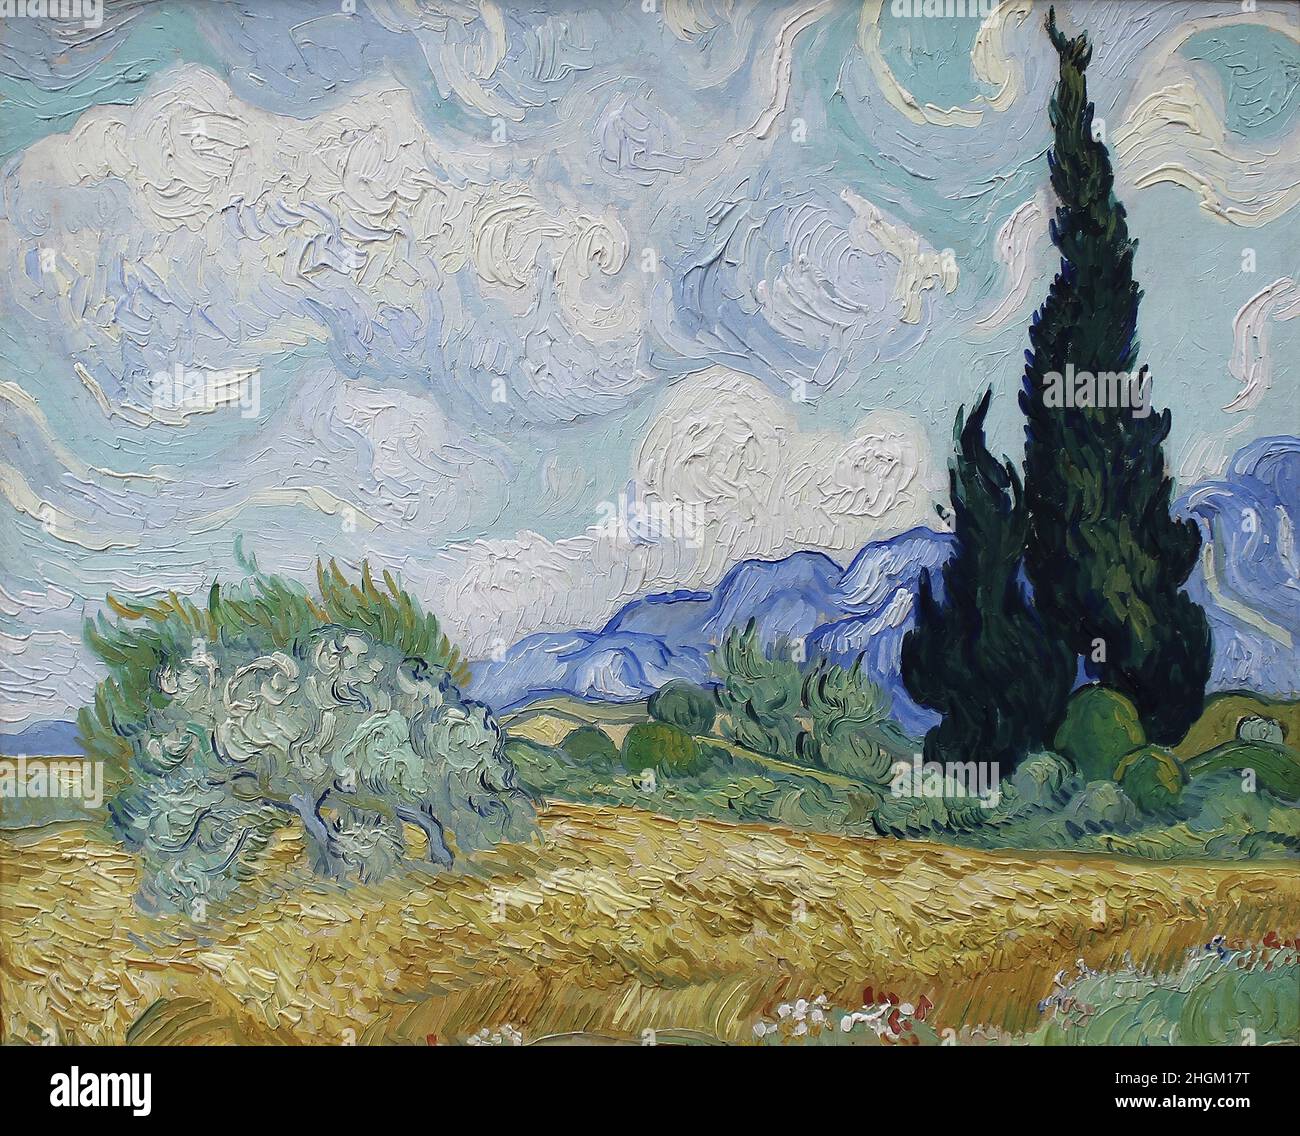 Van Gogh Vincent - Private Collection - Wheatfield with Cypresses - 1889 - Oil on canvas 51,5 x 65 cm Stock Photo